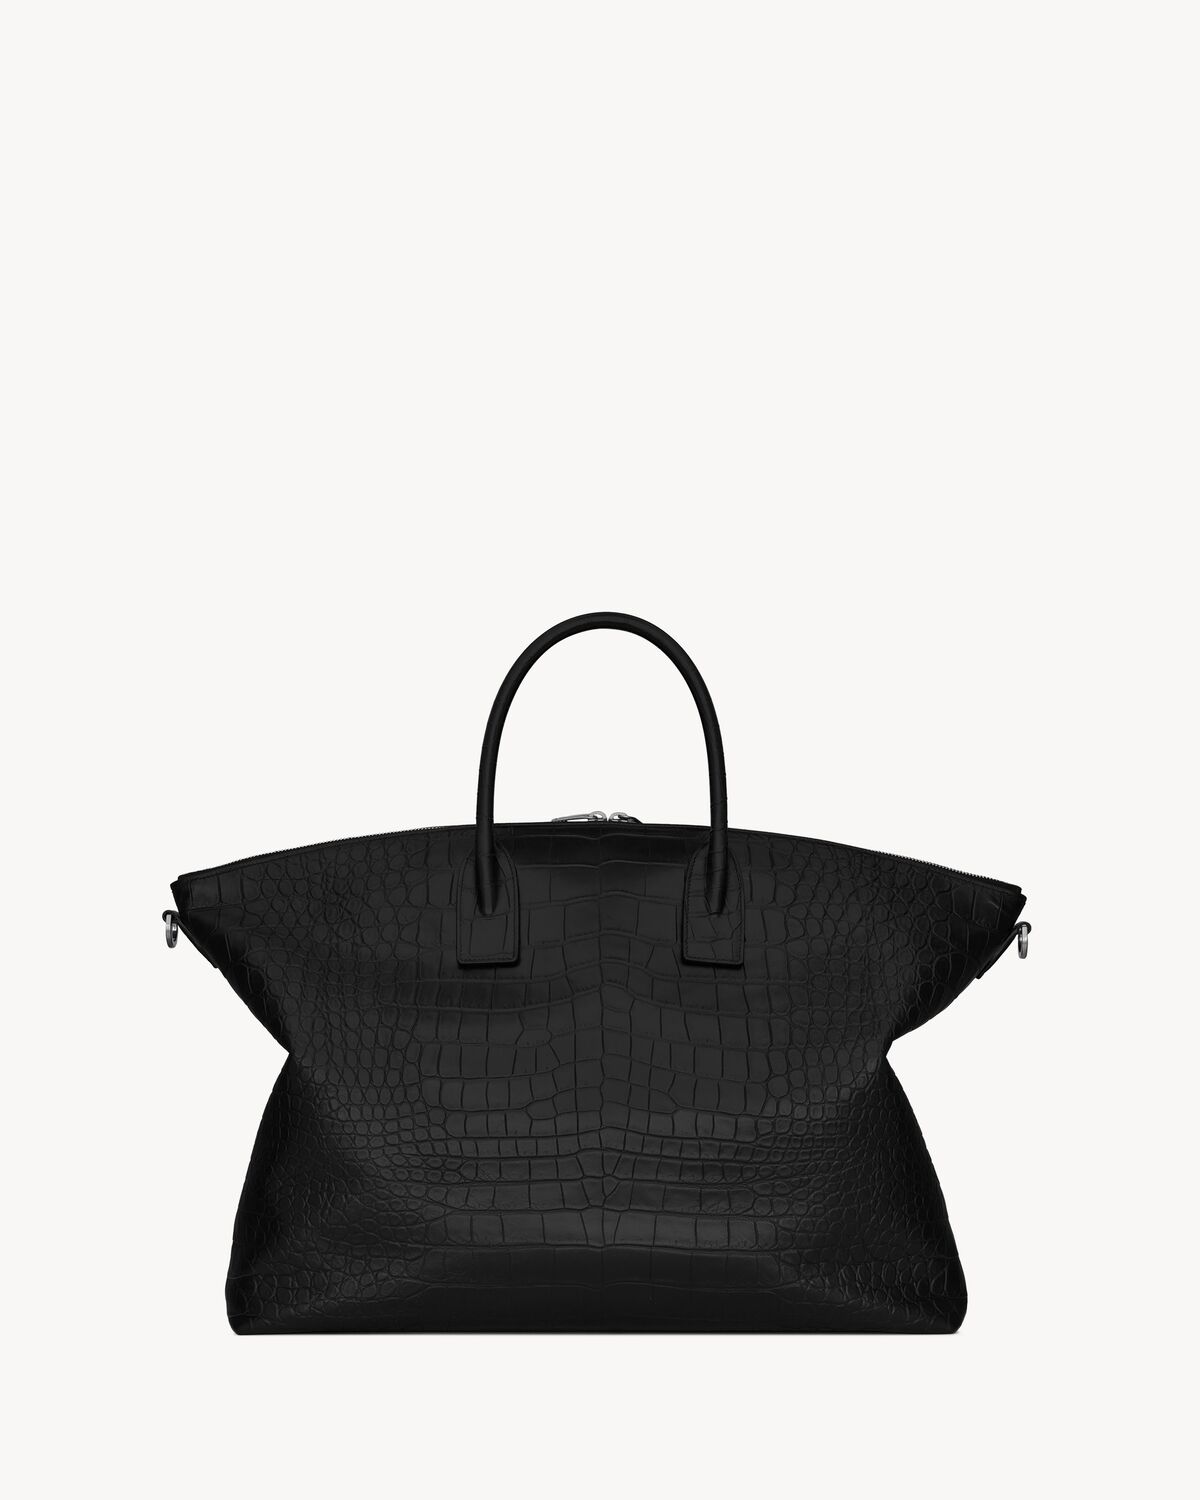 GIANT BOWLING bag in crocodile-embossed leather